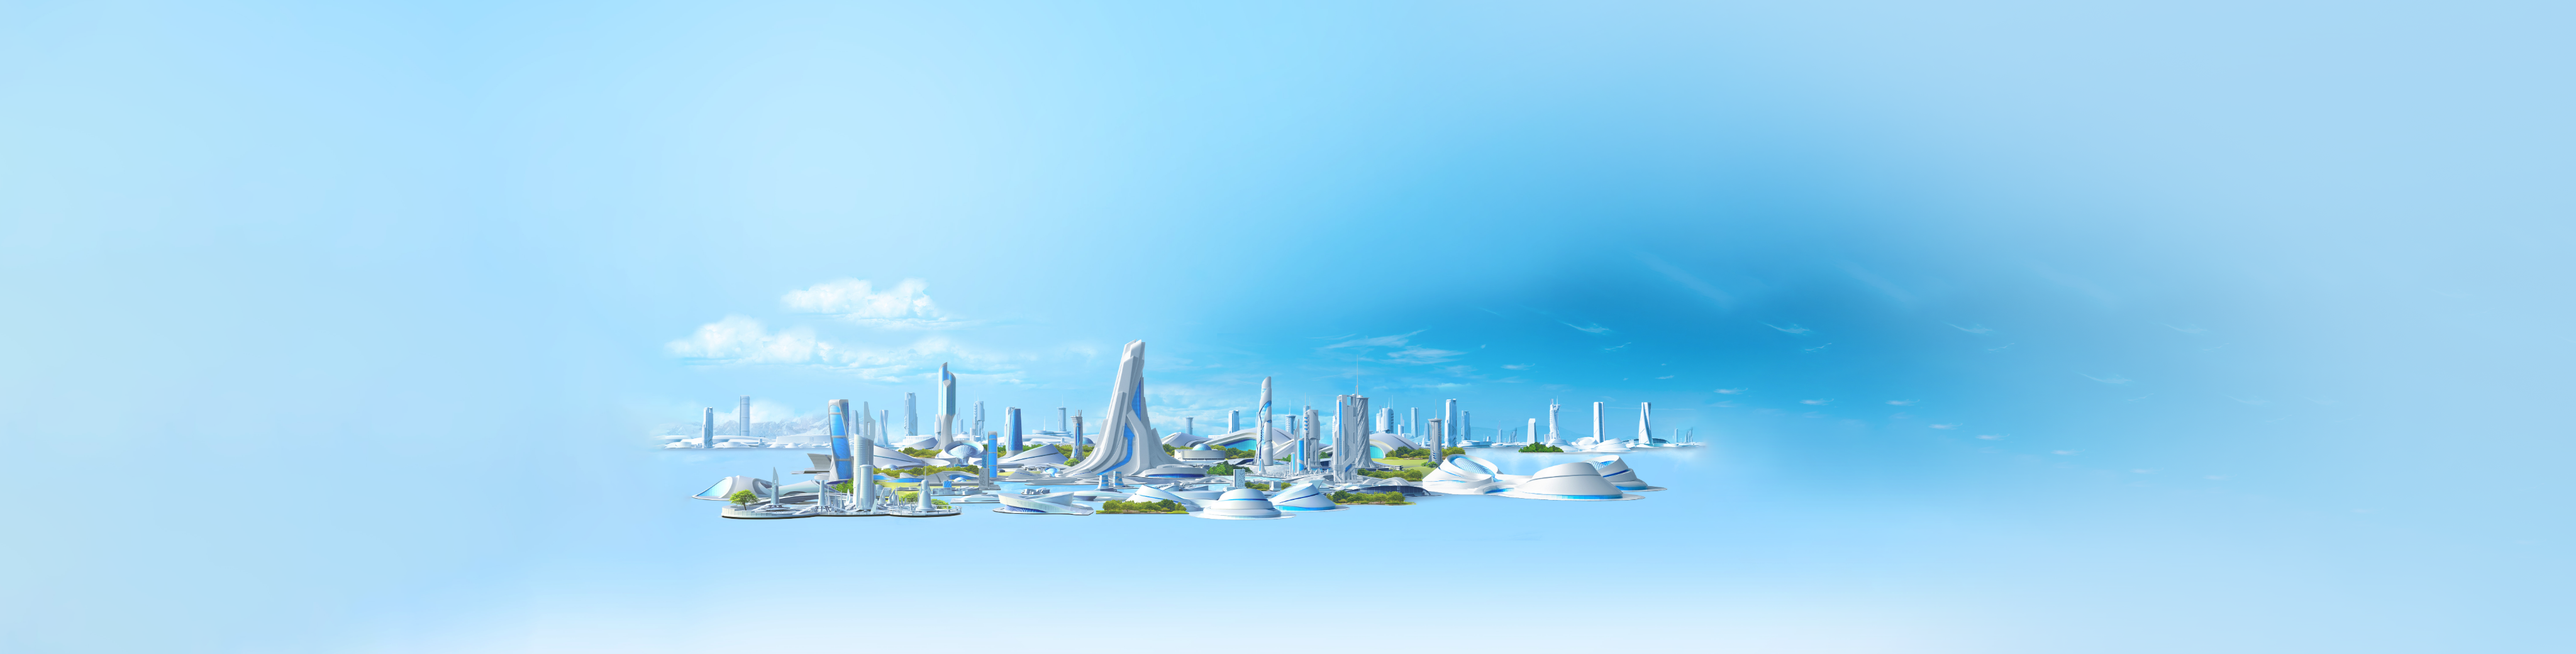 Image of a futuristic city scape. | The Octalysis Group